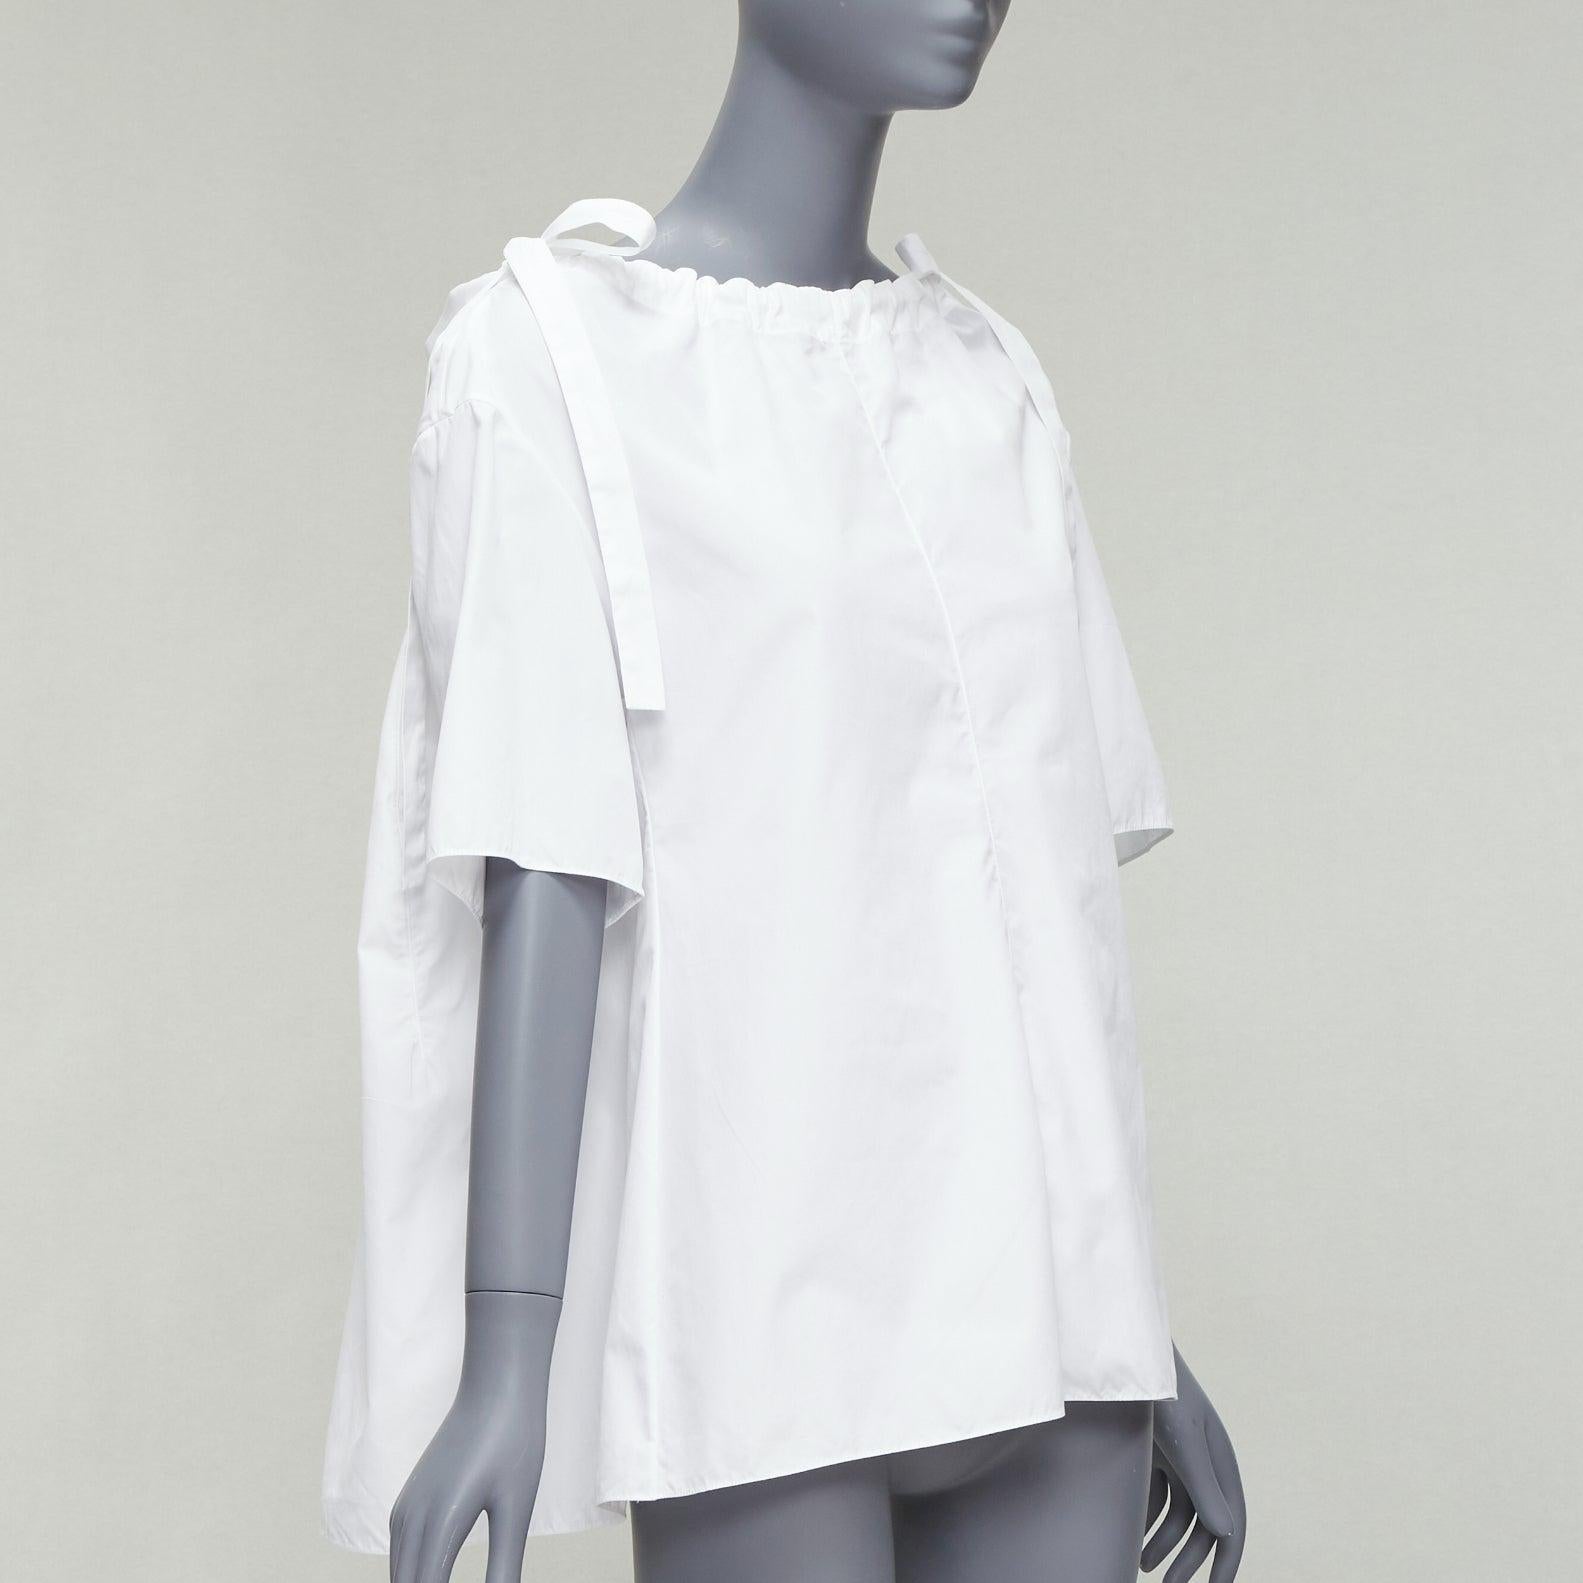 MARNI white 100% cotton side drawstring collar trapeze top IT38 XS
Reference: CELG/A00328
Brand: Marni
Material: Cotton
Color: White
Pattern: Solid
Closure: Drawstring
Extra Details: White drawstring collar design.
Made in: